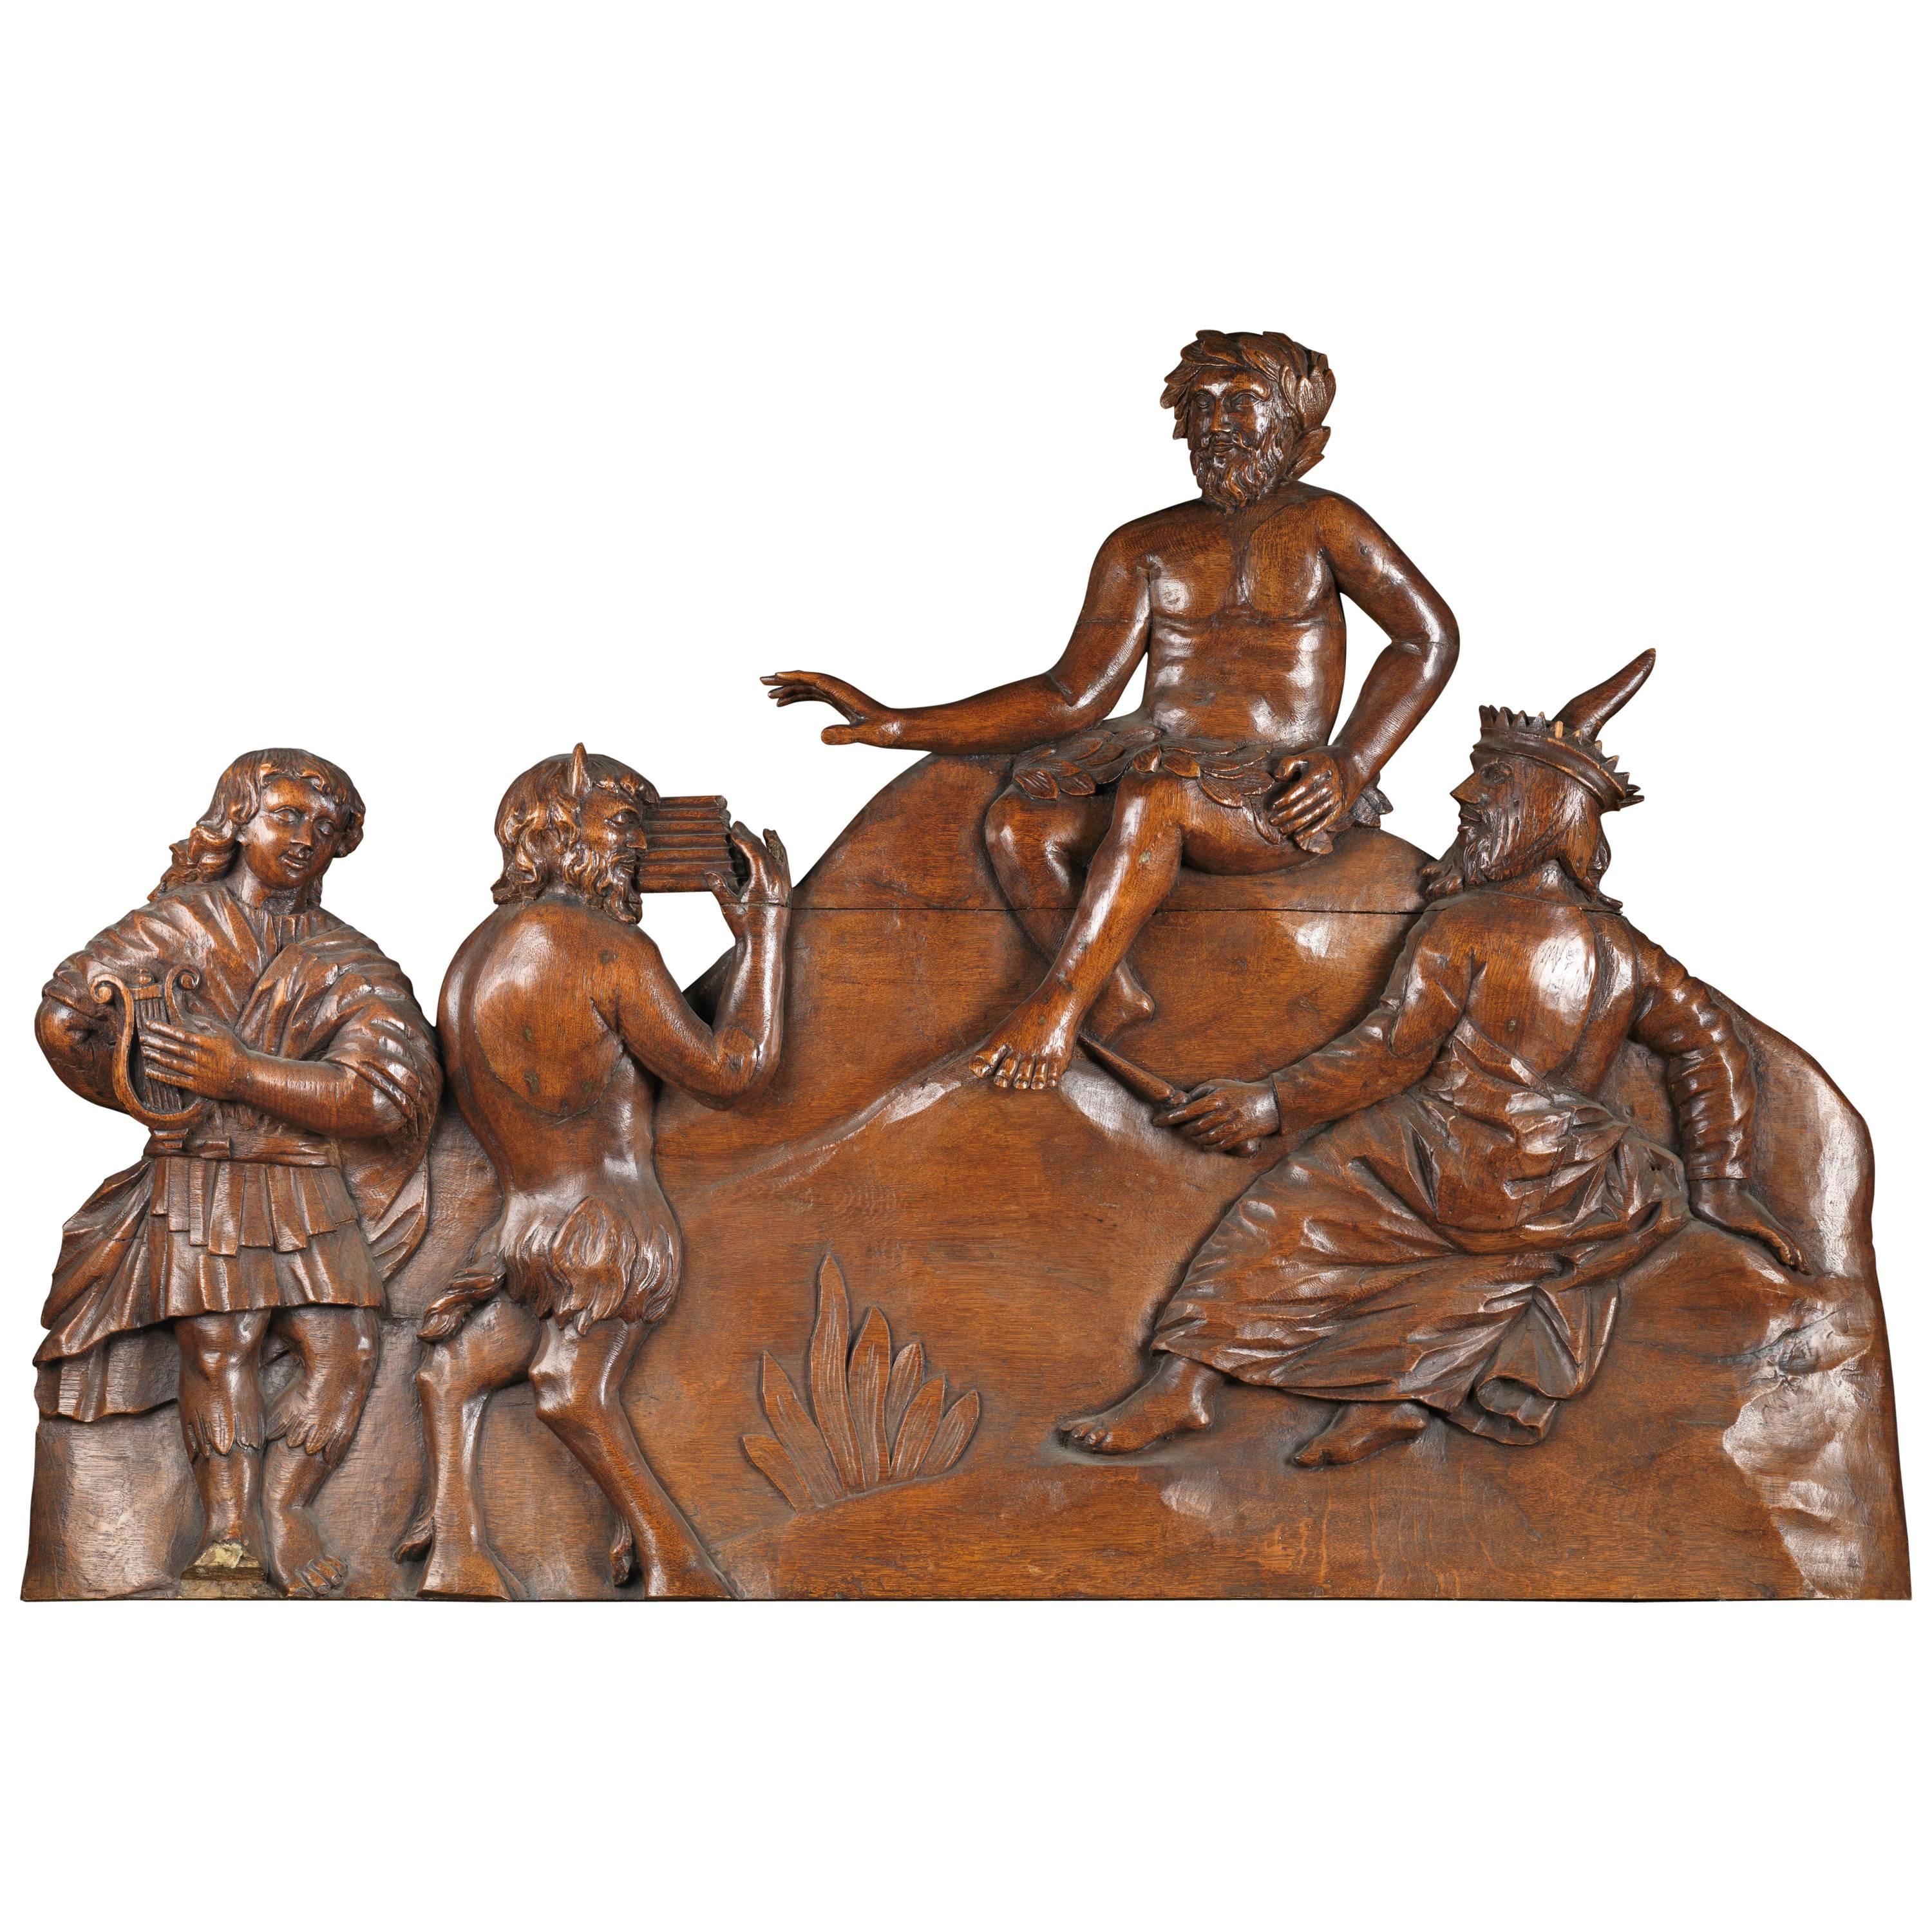 Wooden Panel Sculpture Representing “Midas and the Ass’s Ears”, France